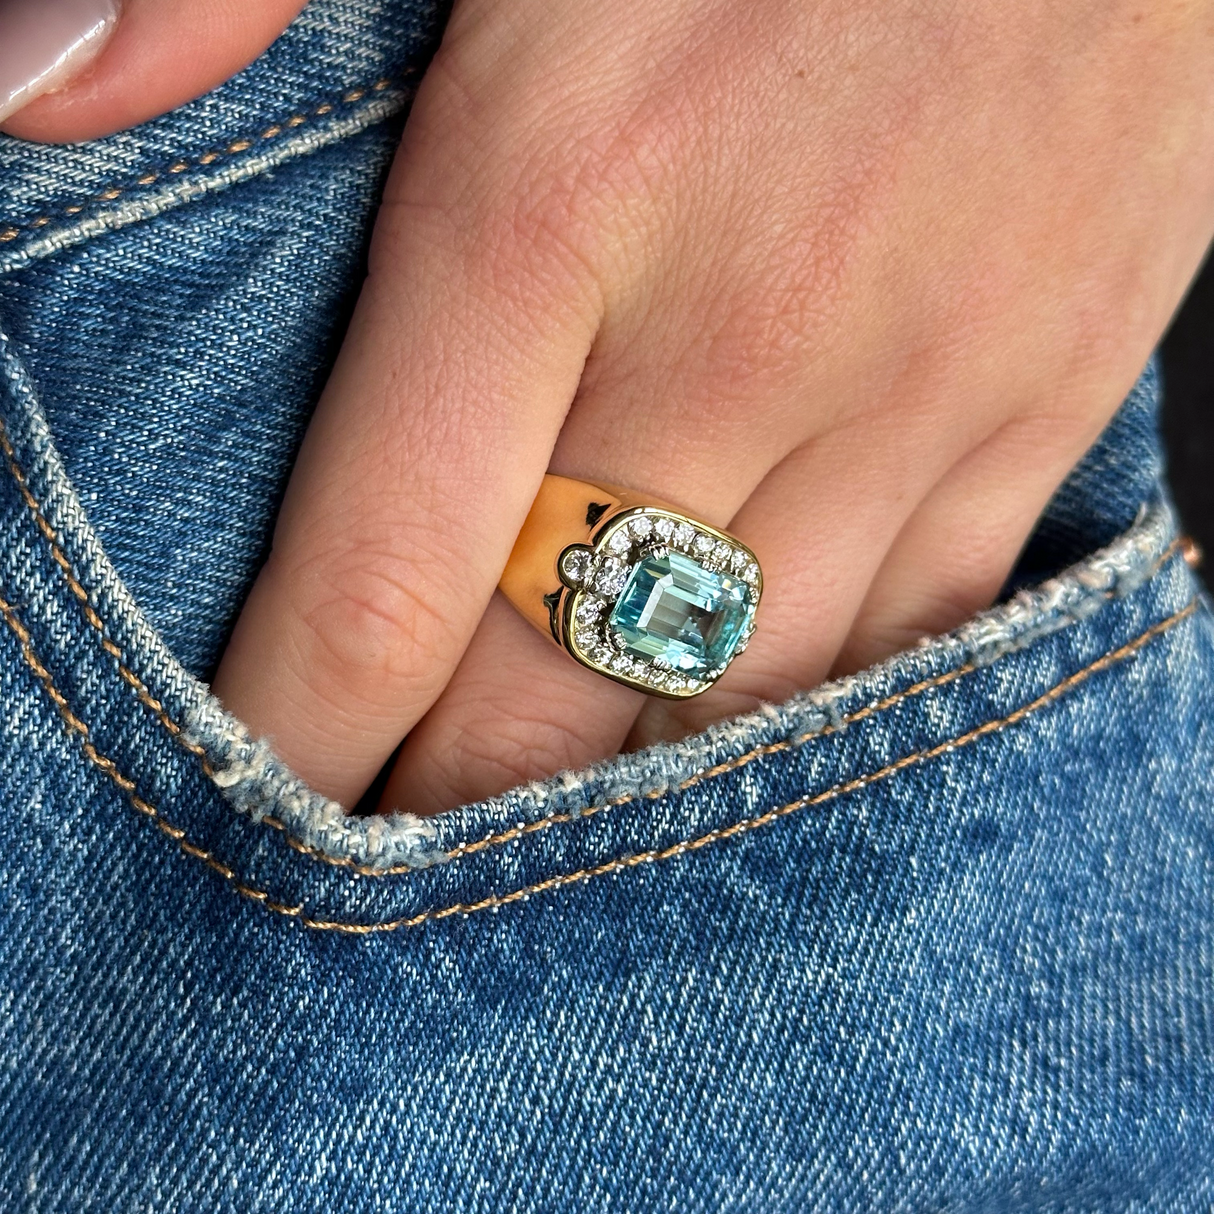 Aquamarine and diamond cocktail ring worn on hand in pocket of jeans.